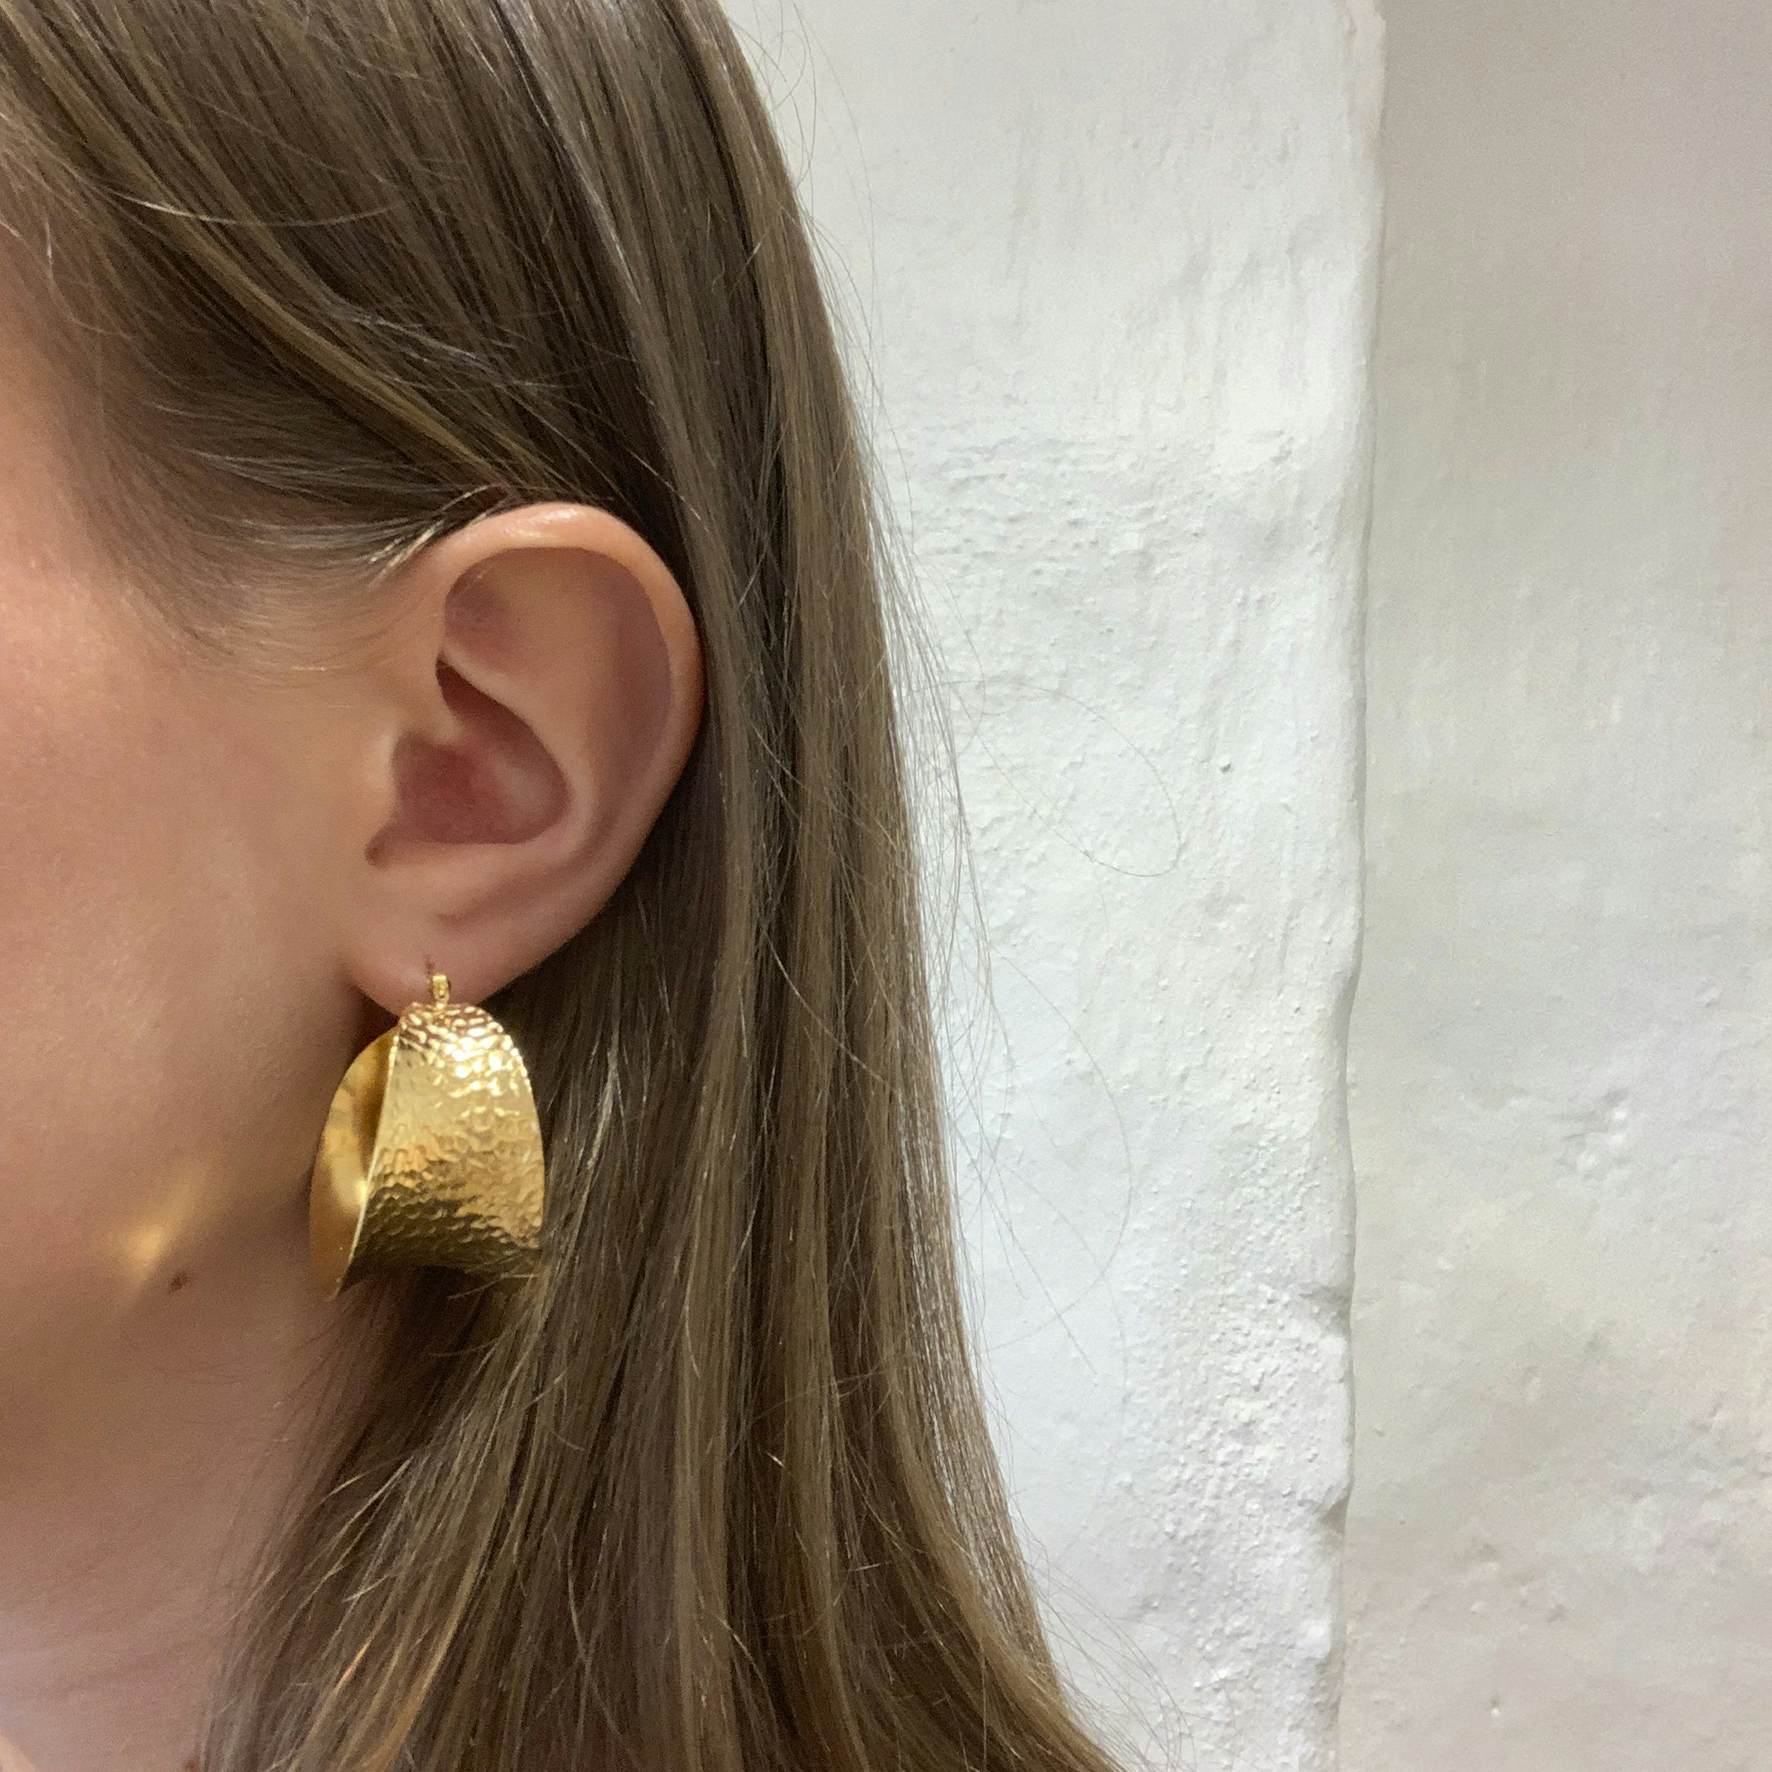 Cleo Grande Hoops from Pico in Goldplated Brass